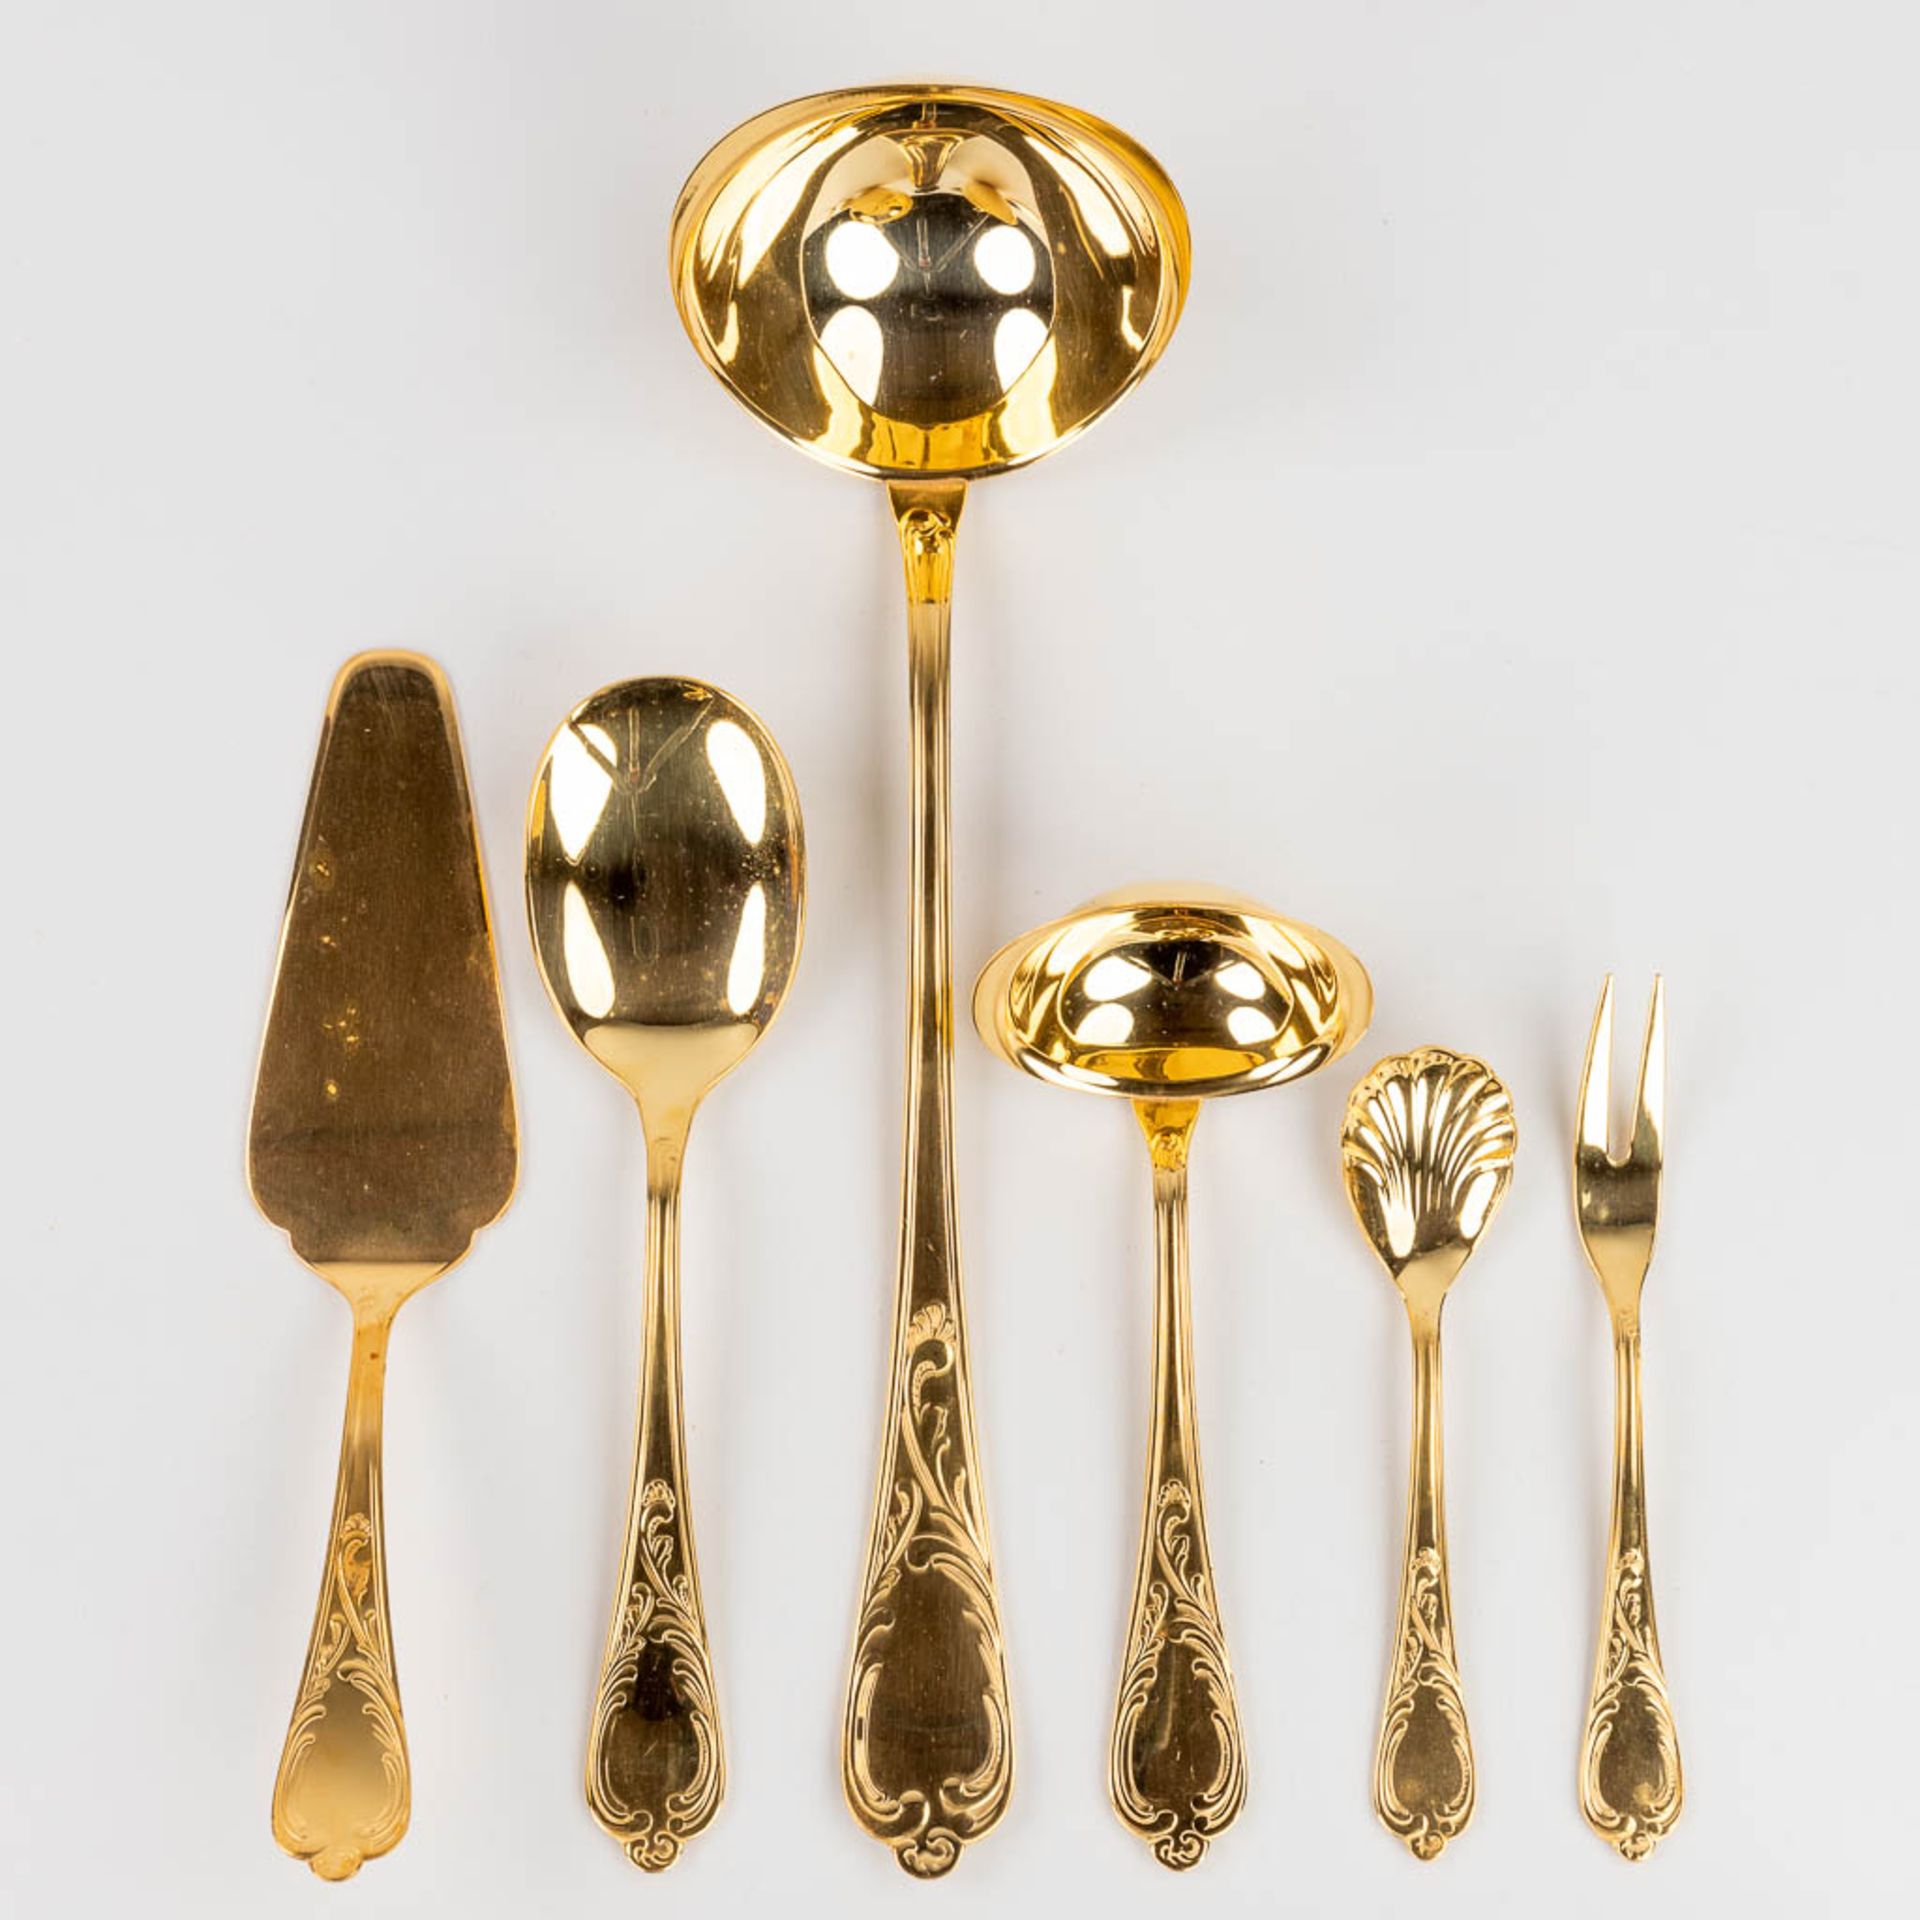 A gold-plated 'Royal Collection Solingen' flatware cutlery set, made in Germany (L:34 x W:45,5 x H:9 - Image 10 of 15